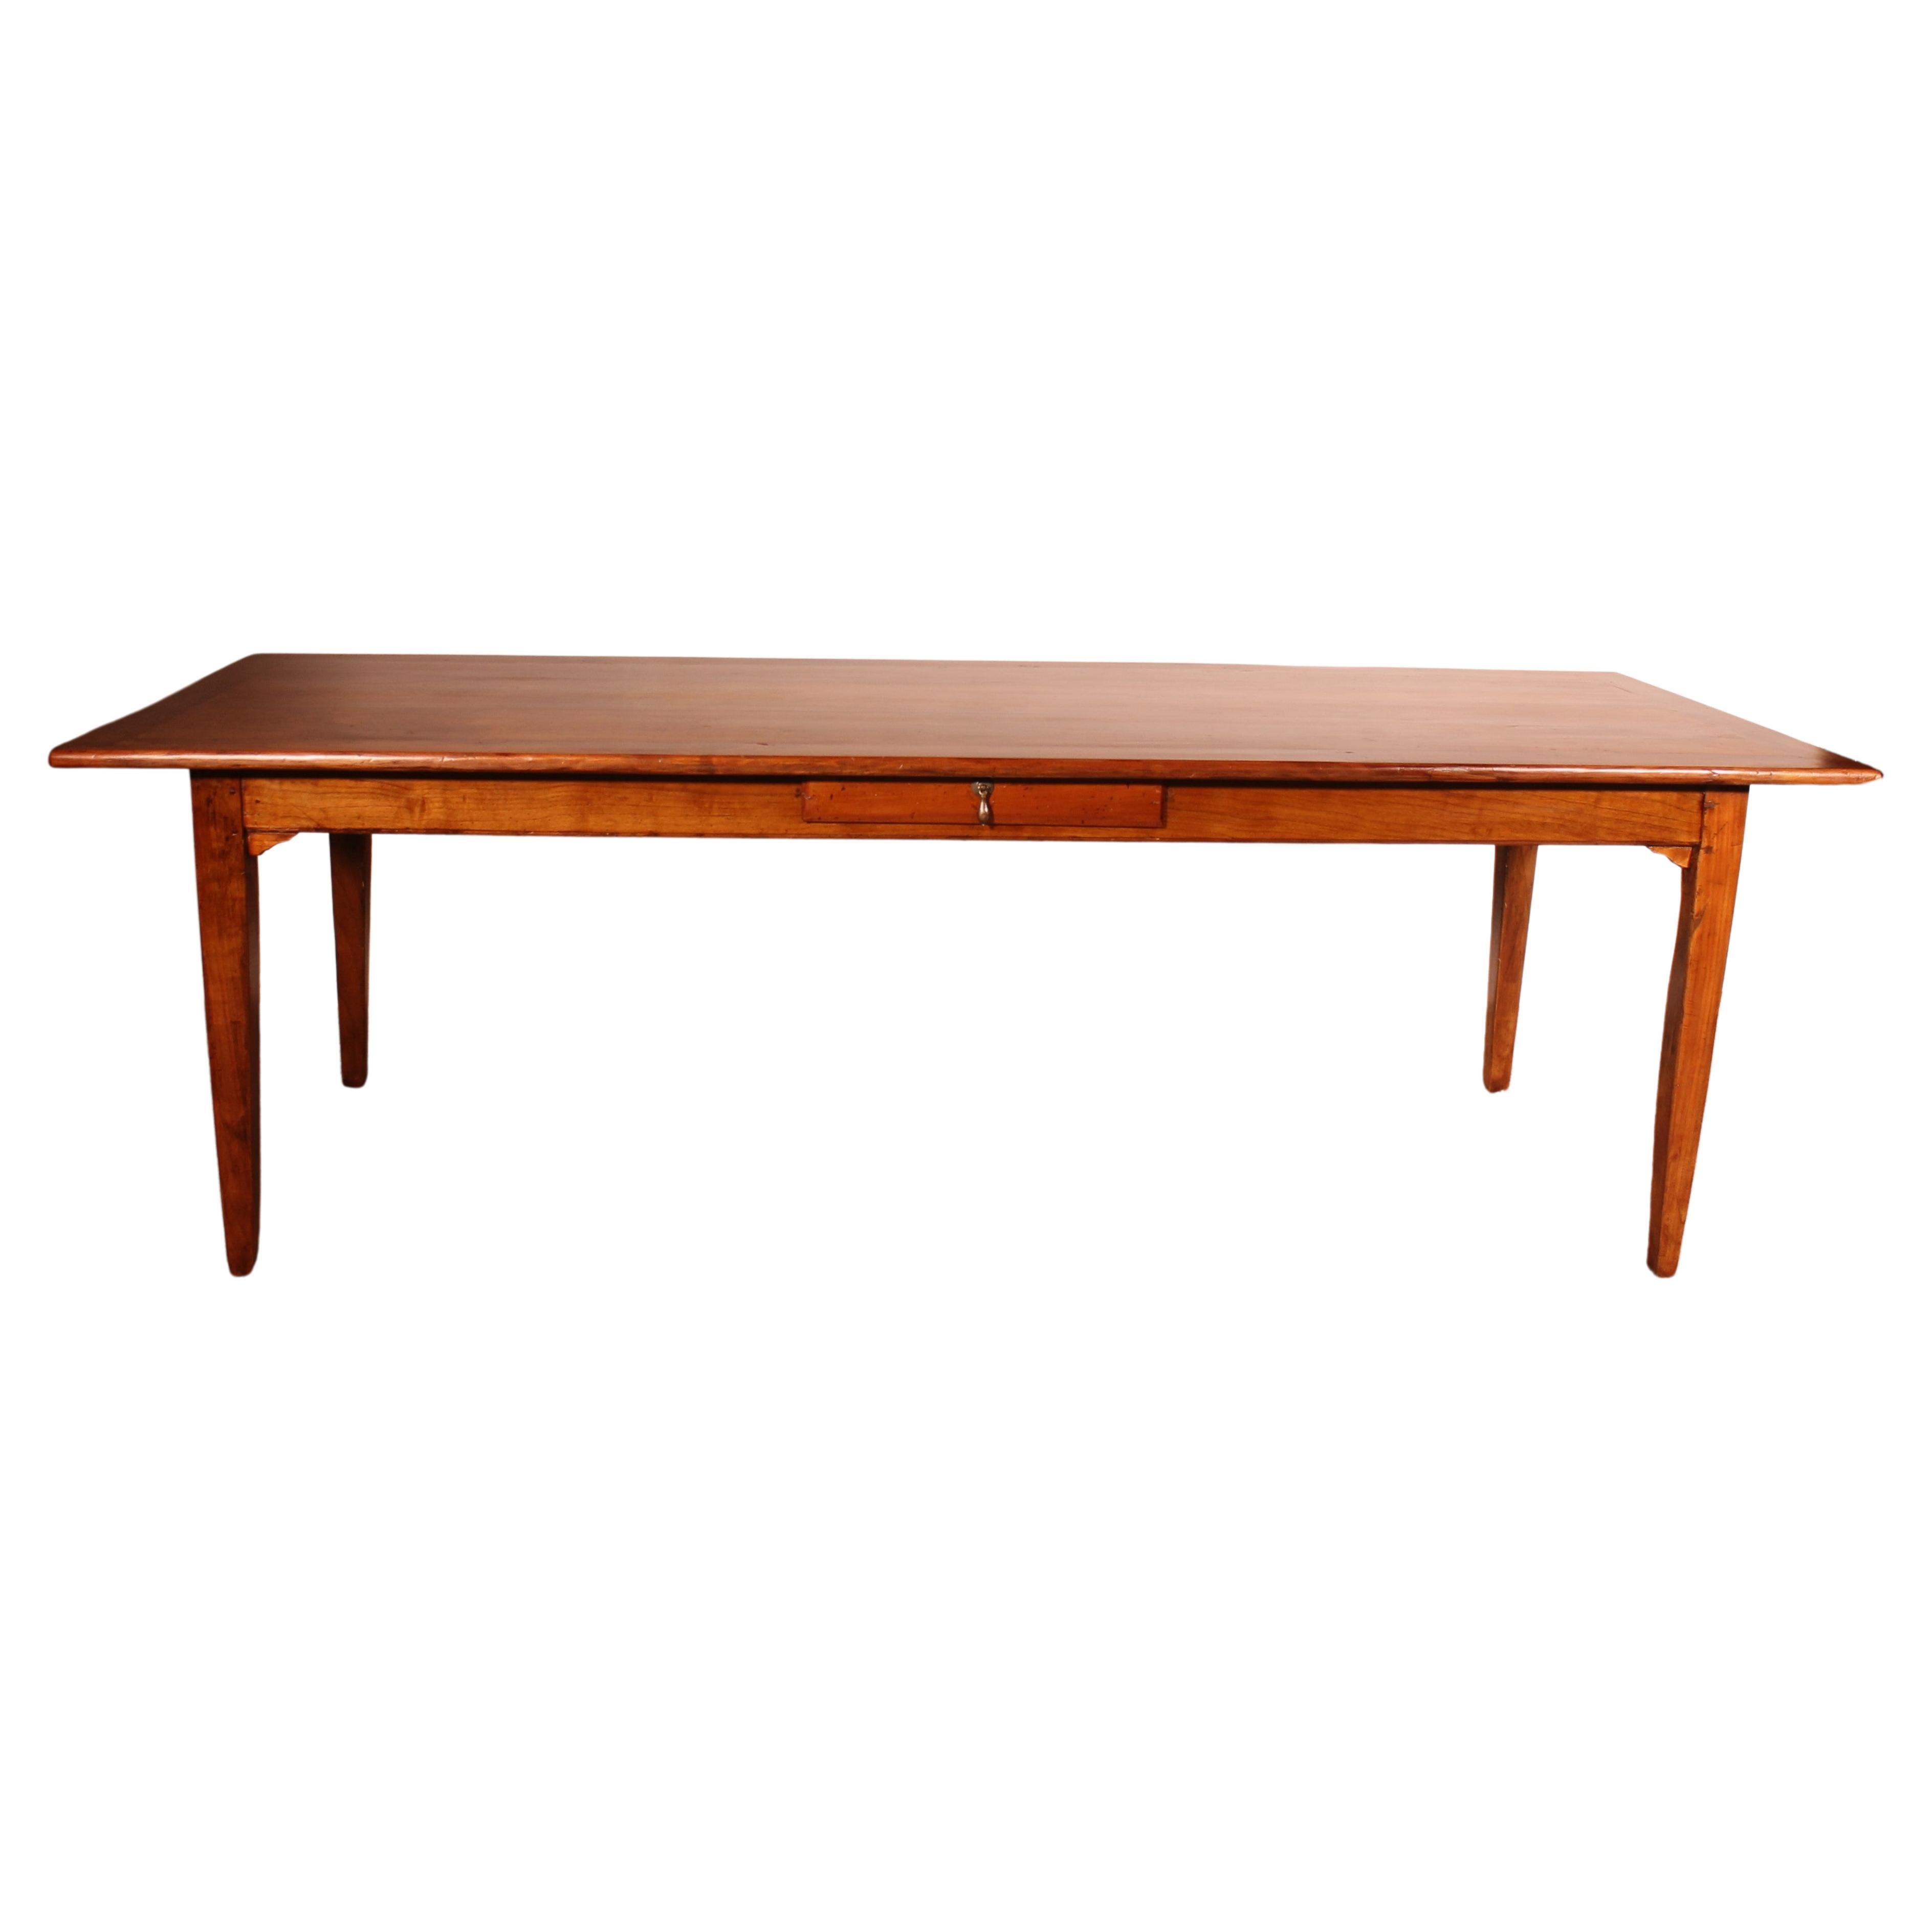 Large 19th Century Cherry Wood Refectory Table For Sale